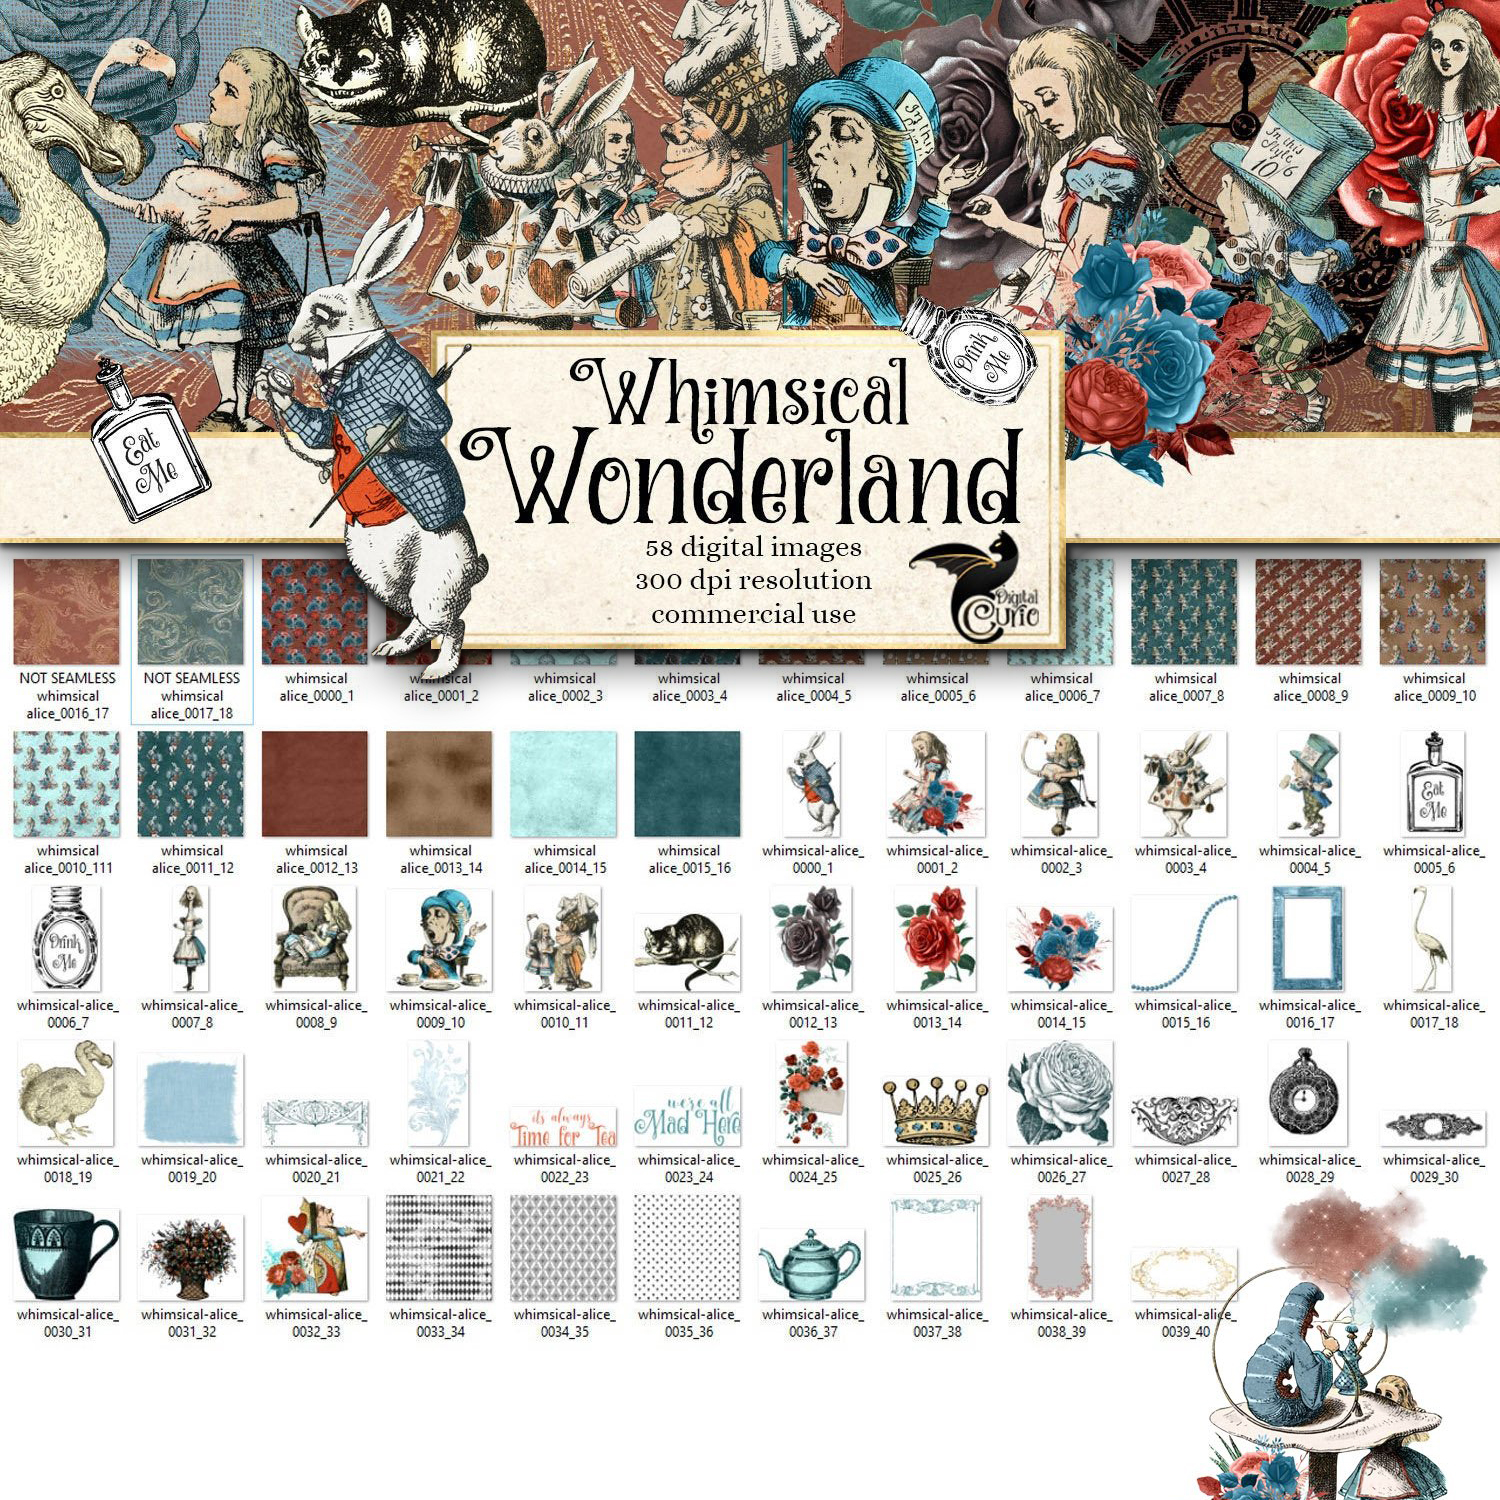 Preview whimsical wonderland alice in wonderland tea party.